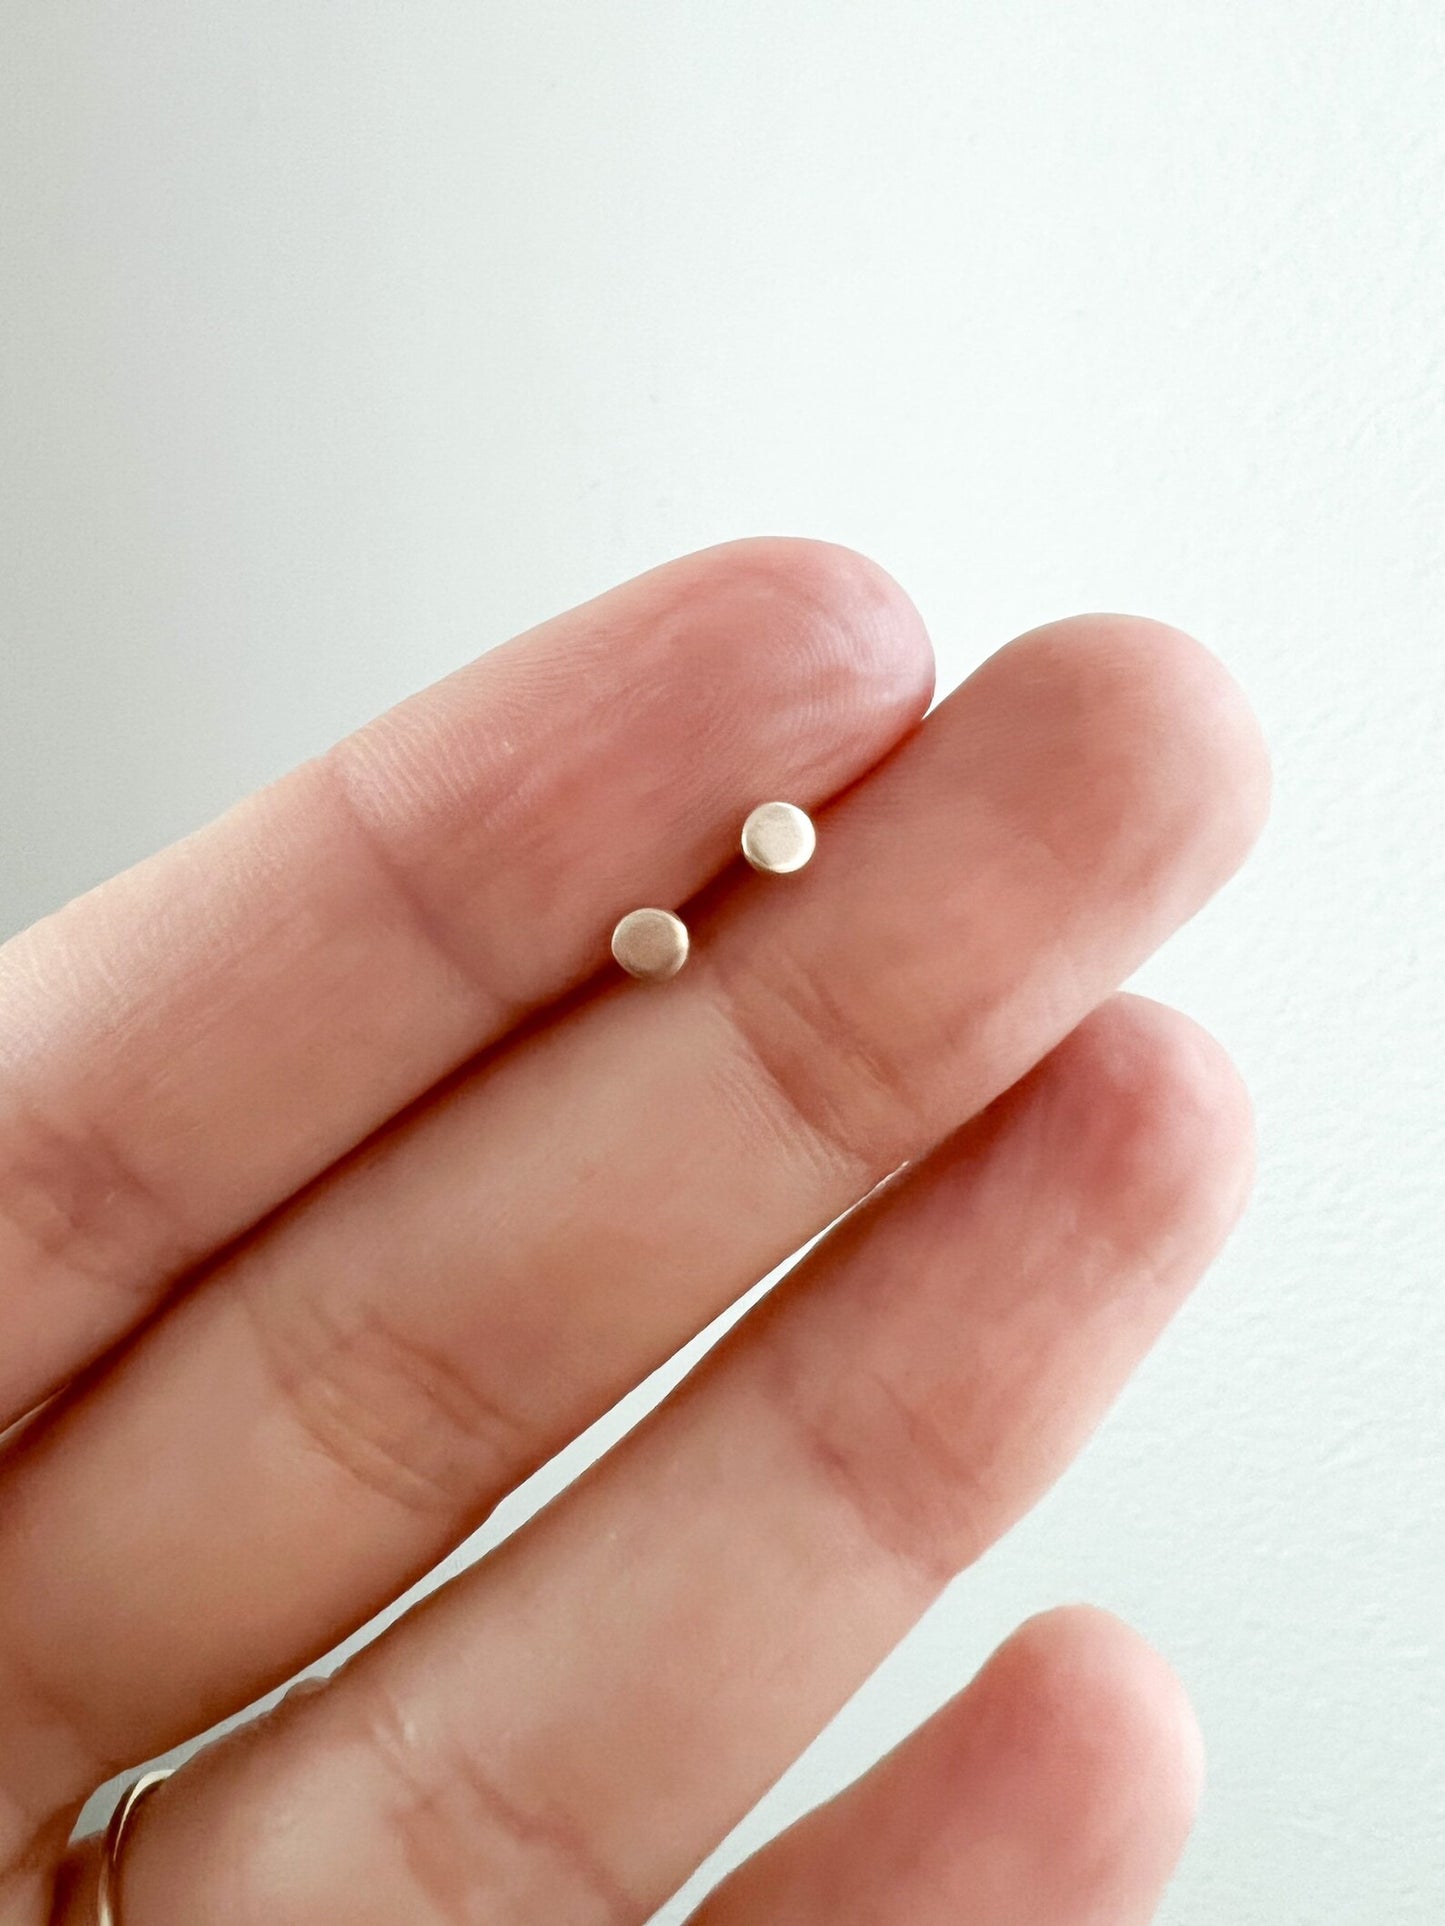 Gold Micro Studs by Elm Designs